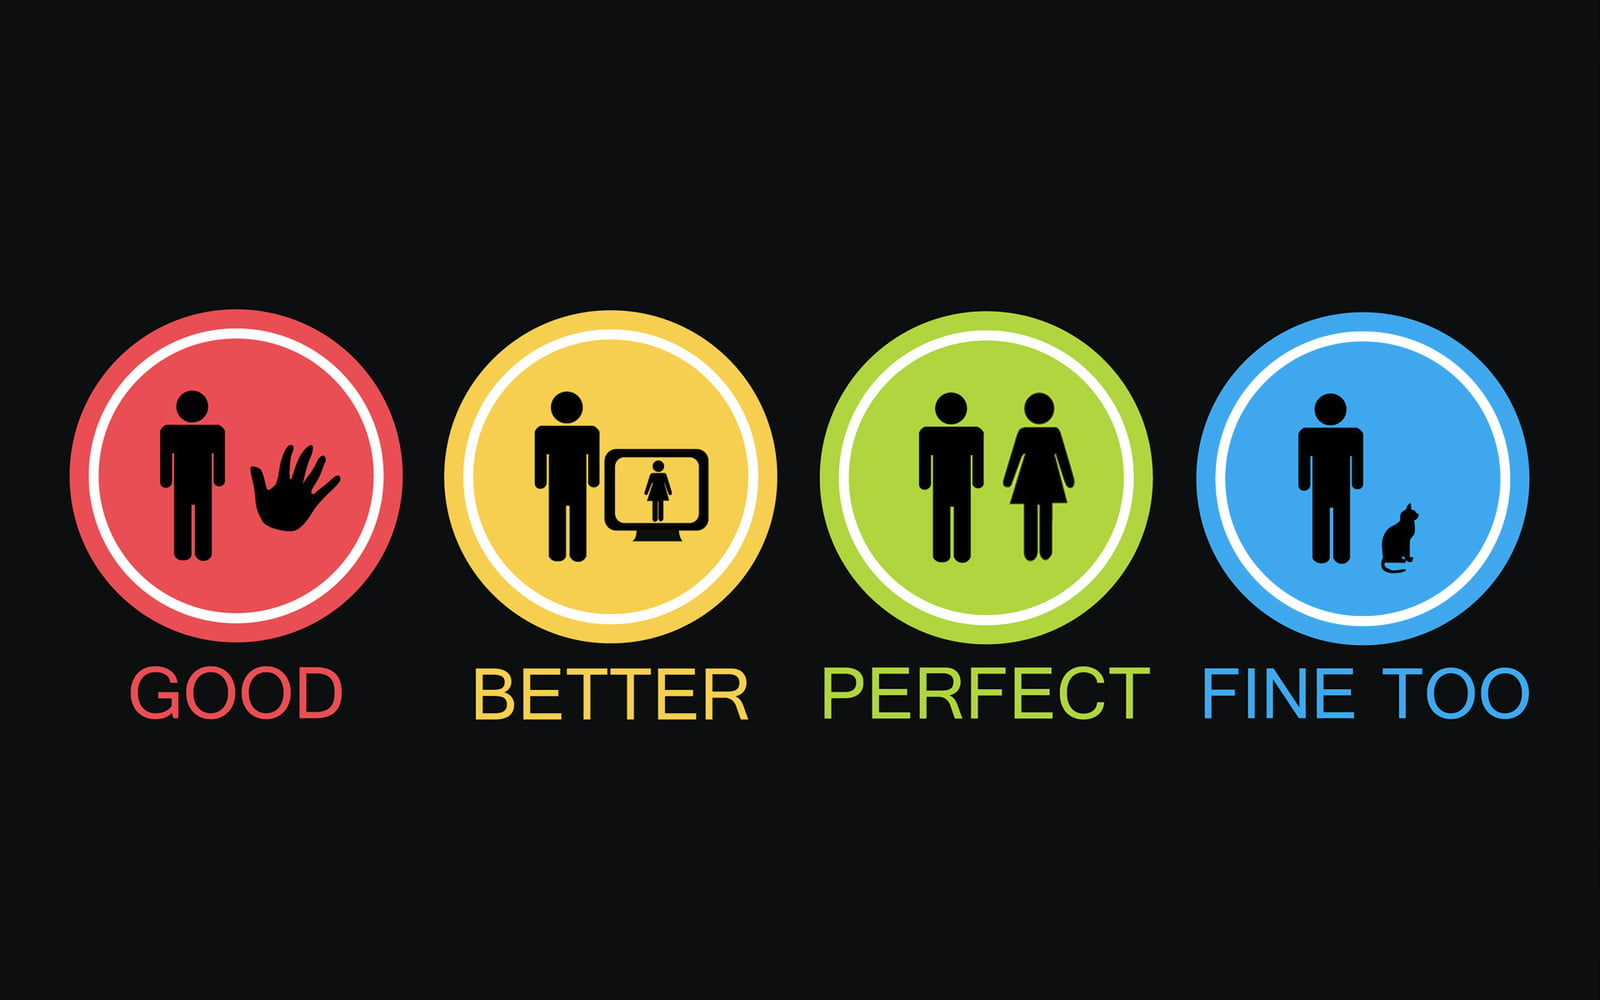 good, better, perfect, and fine too logo, Good Better Perfect Fine Too artwork